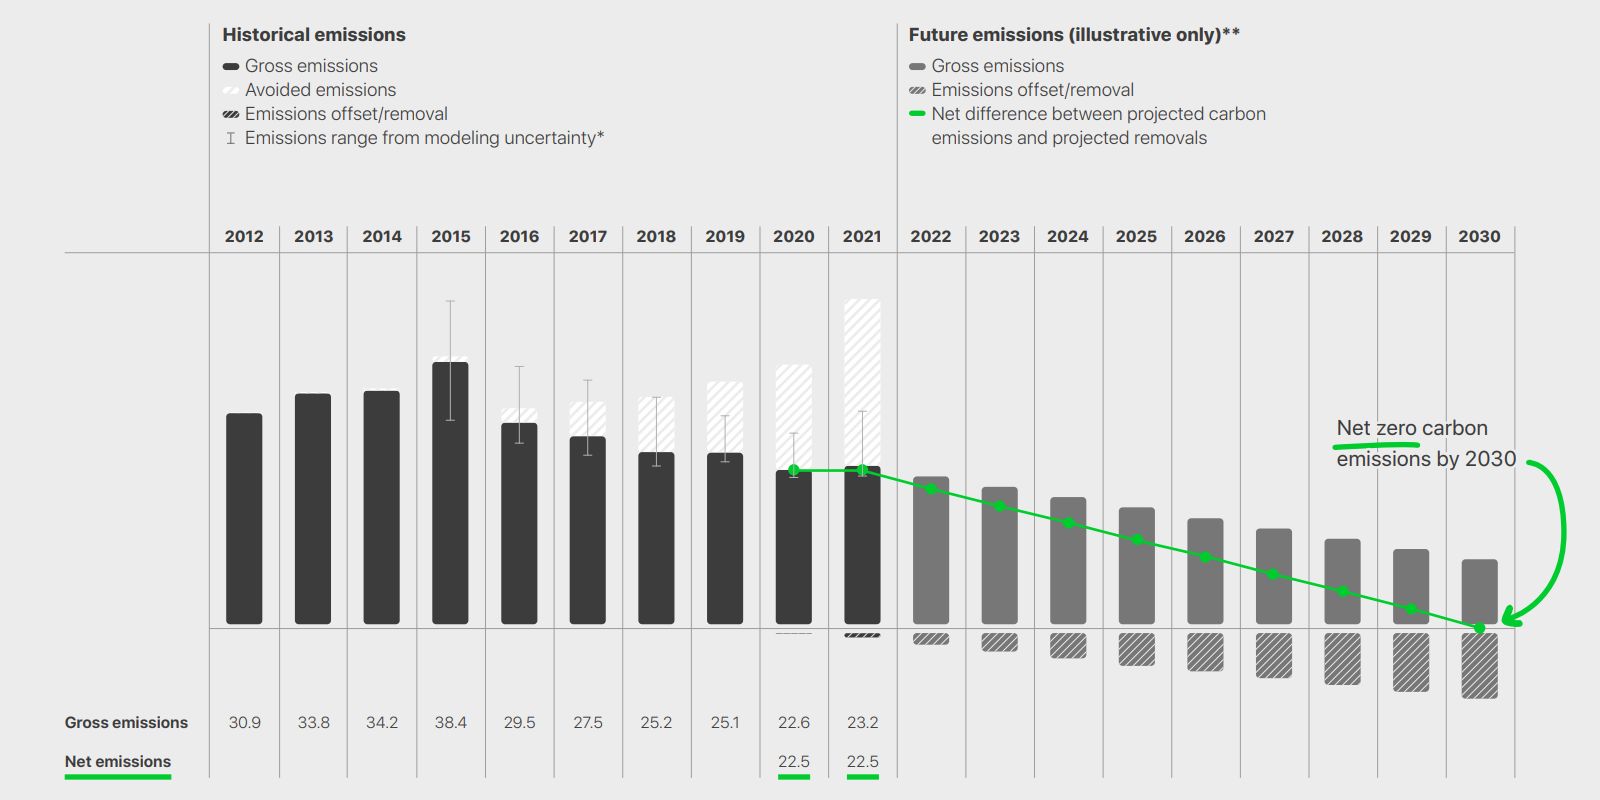 Apple's historical emissions have been trending down since 2015 and are projected to reach net zero carbon by 2030.